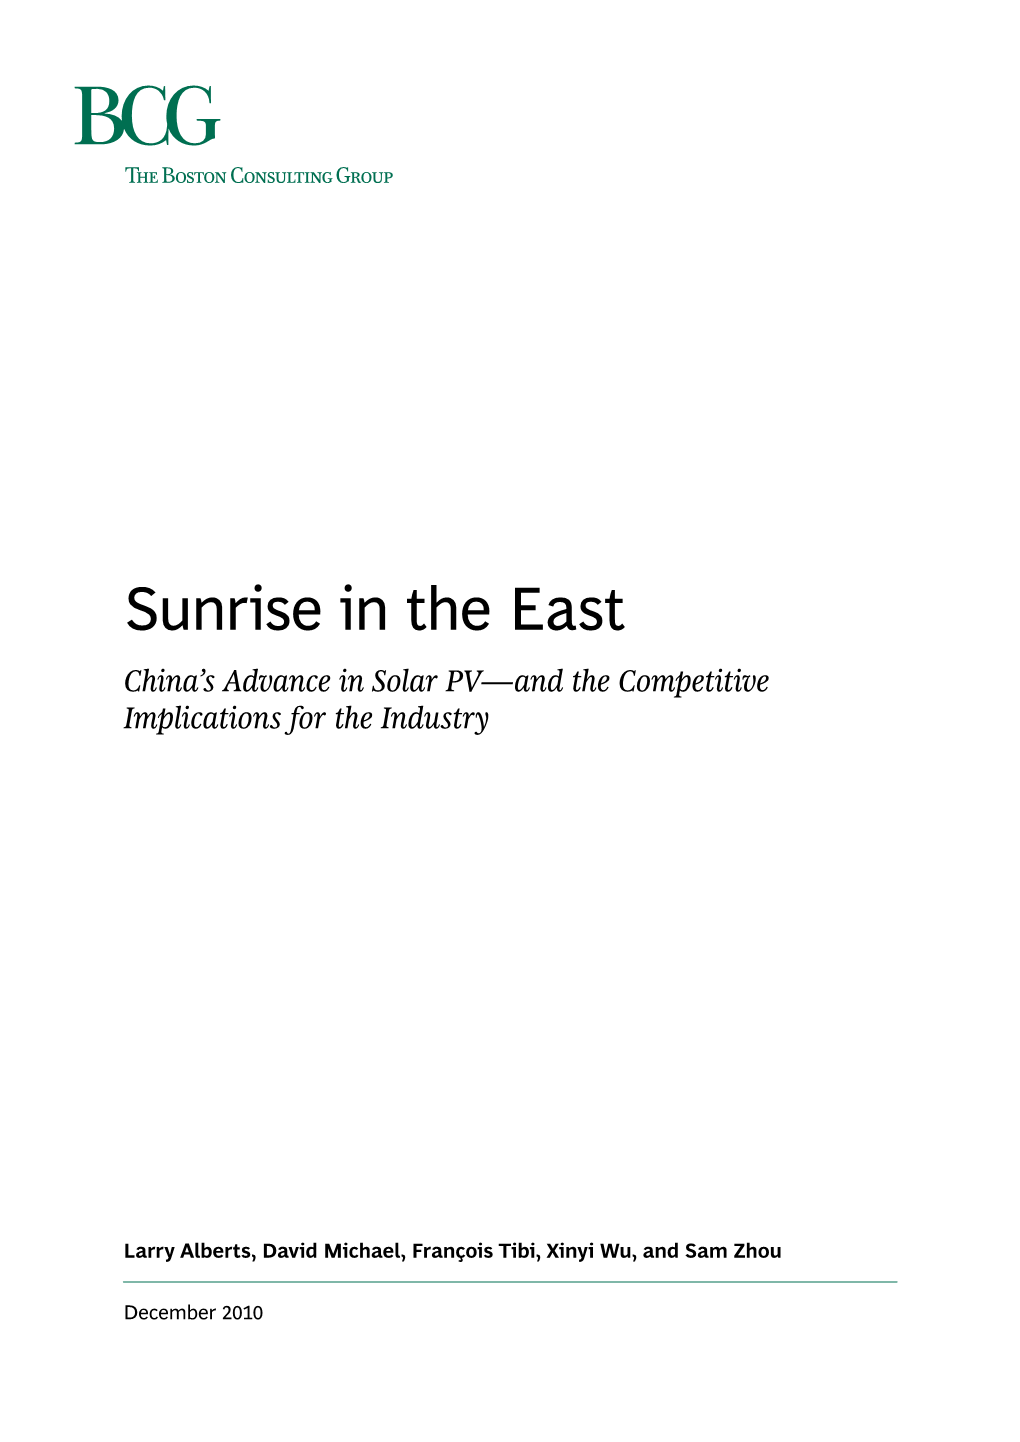 Sunrise in the East China’S Advance in Solar PV—And the Competitive Implications for the Industry